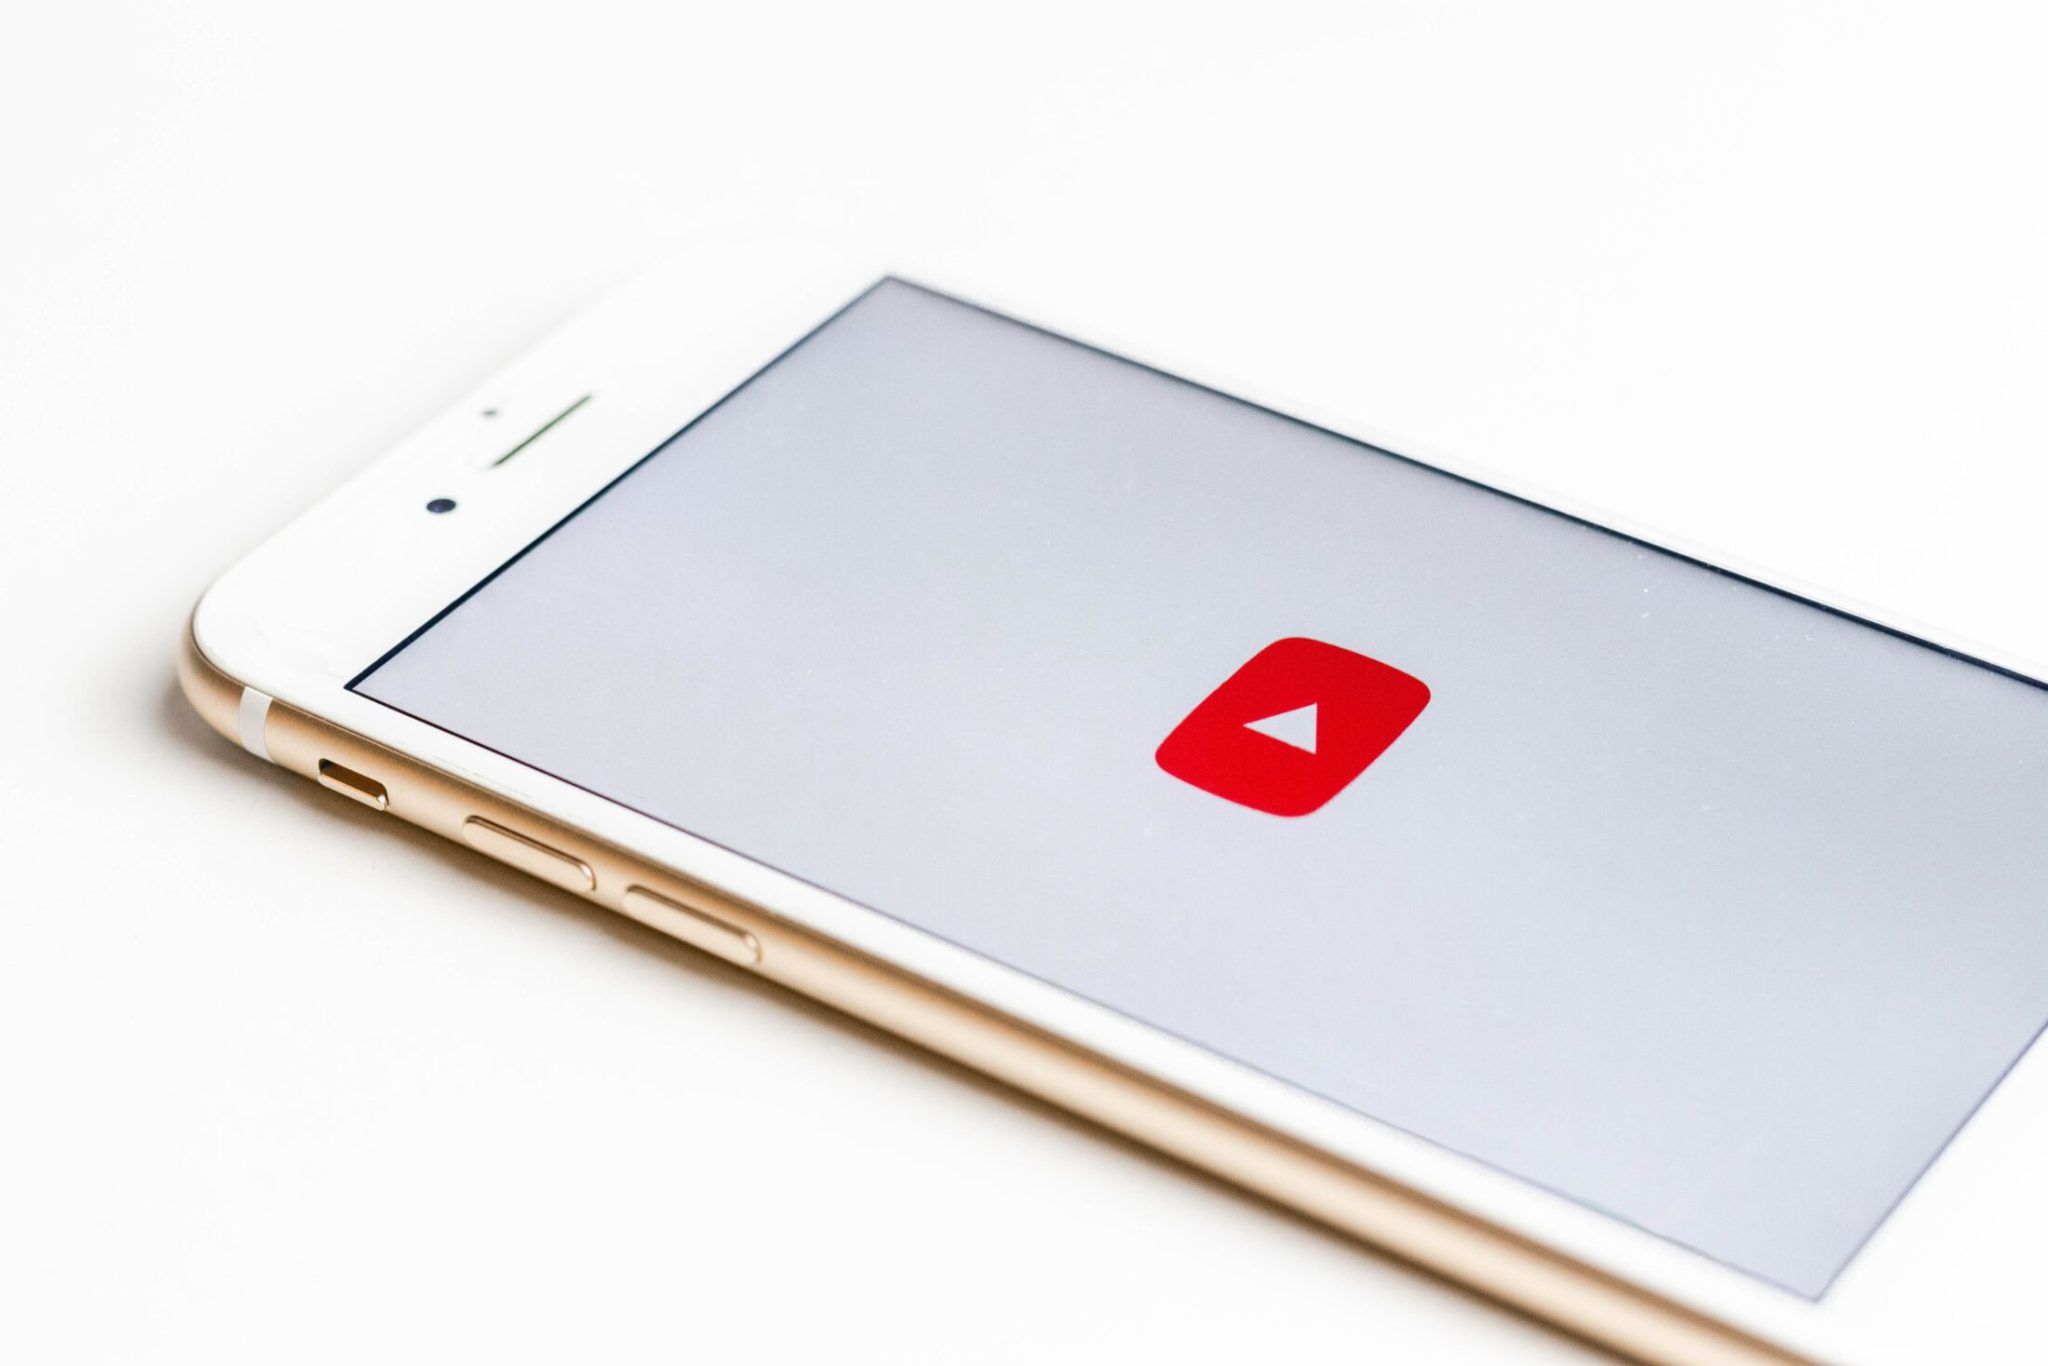 Mobile phone with YouTube logo on screen